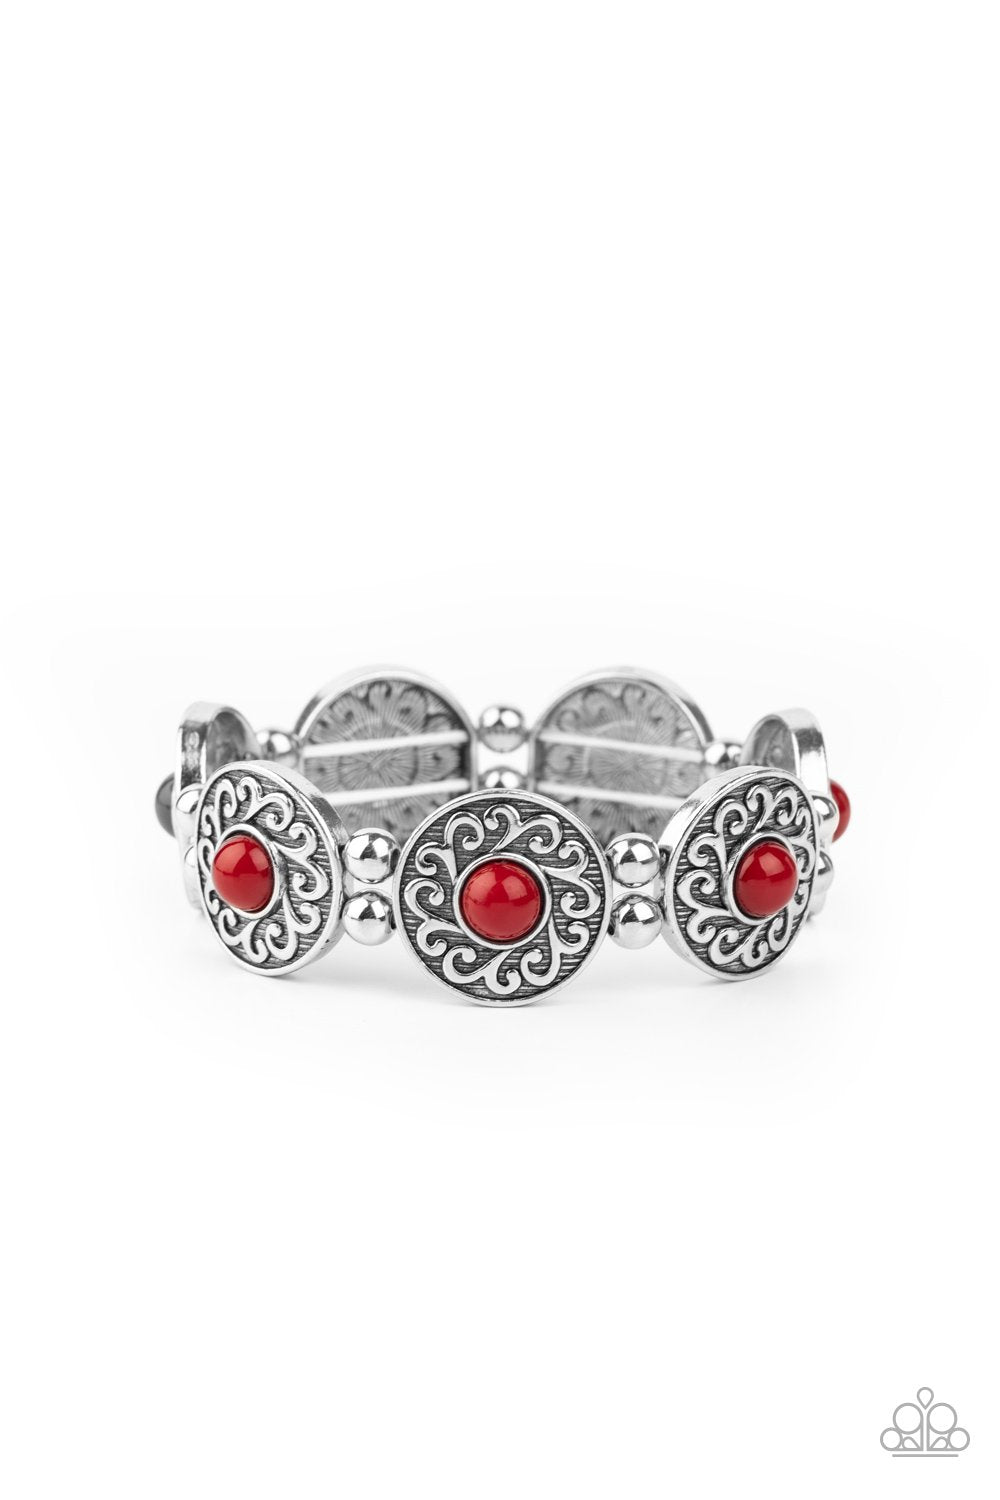 Flirty Finery Red and Silver Bracelet - Paparazzi Accessories - lightbox -CarasShop.com - $5 Jewelry by Cara Jewels